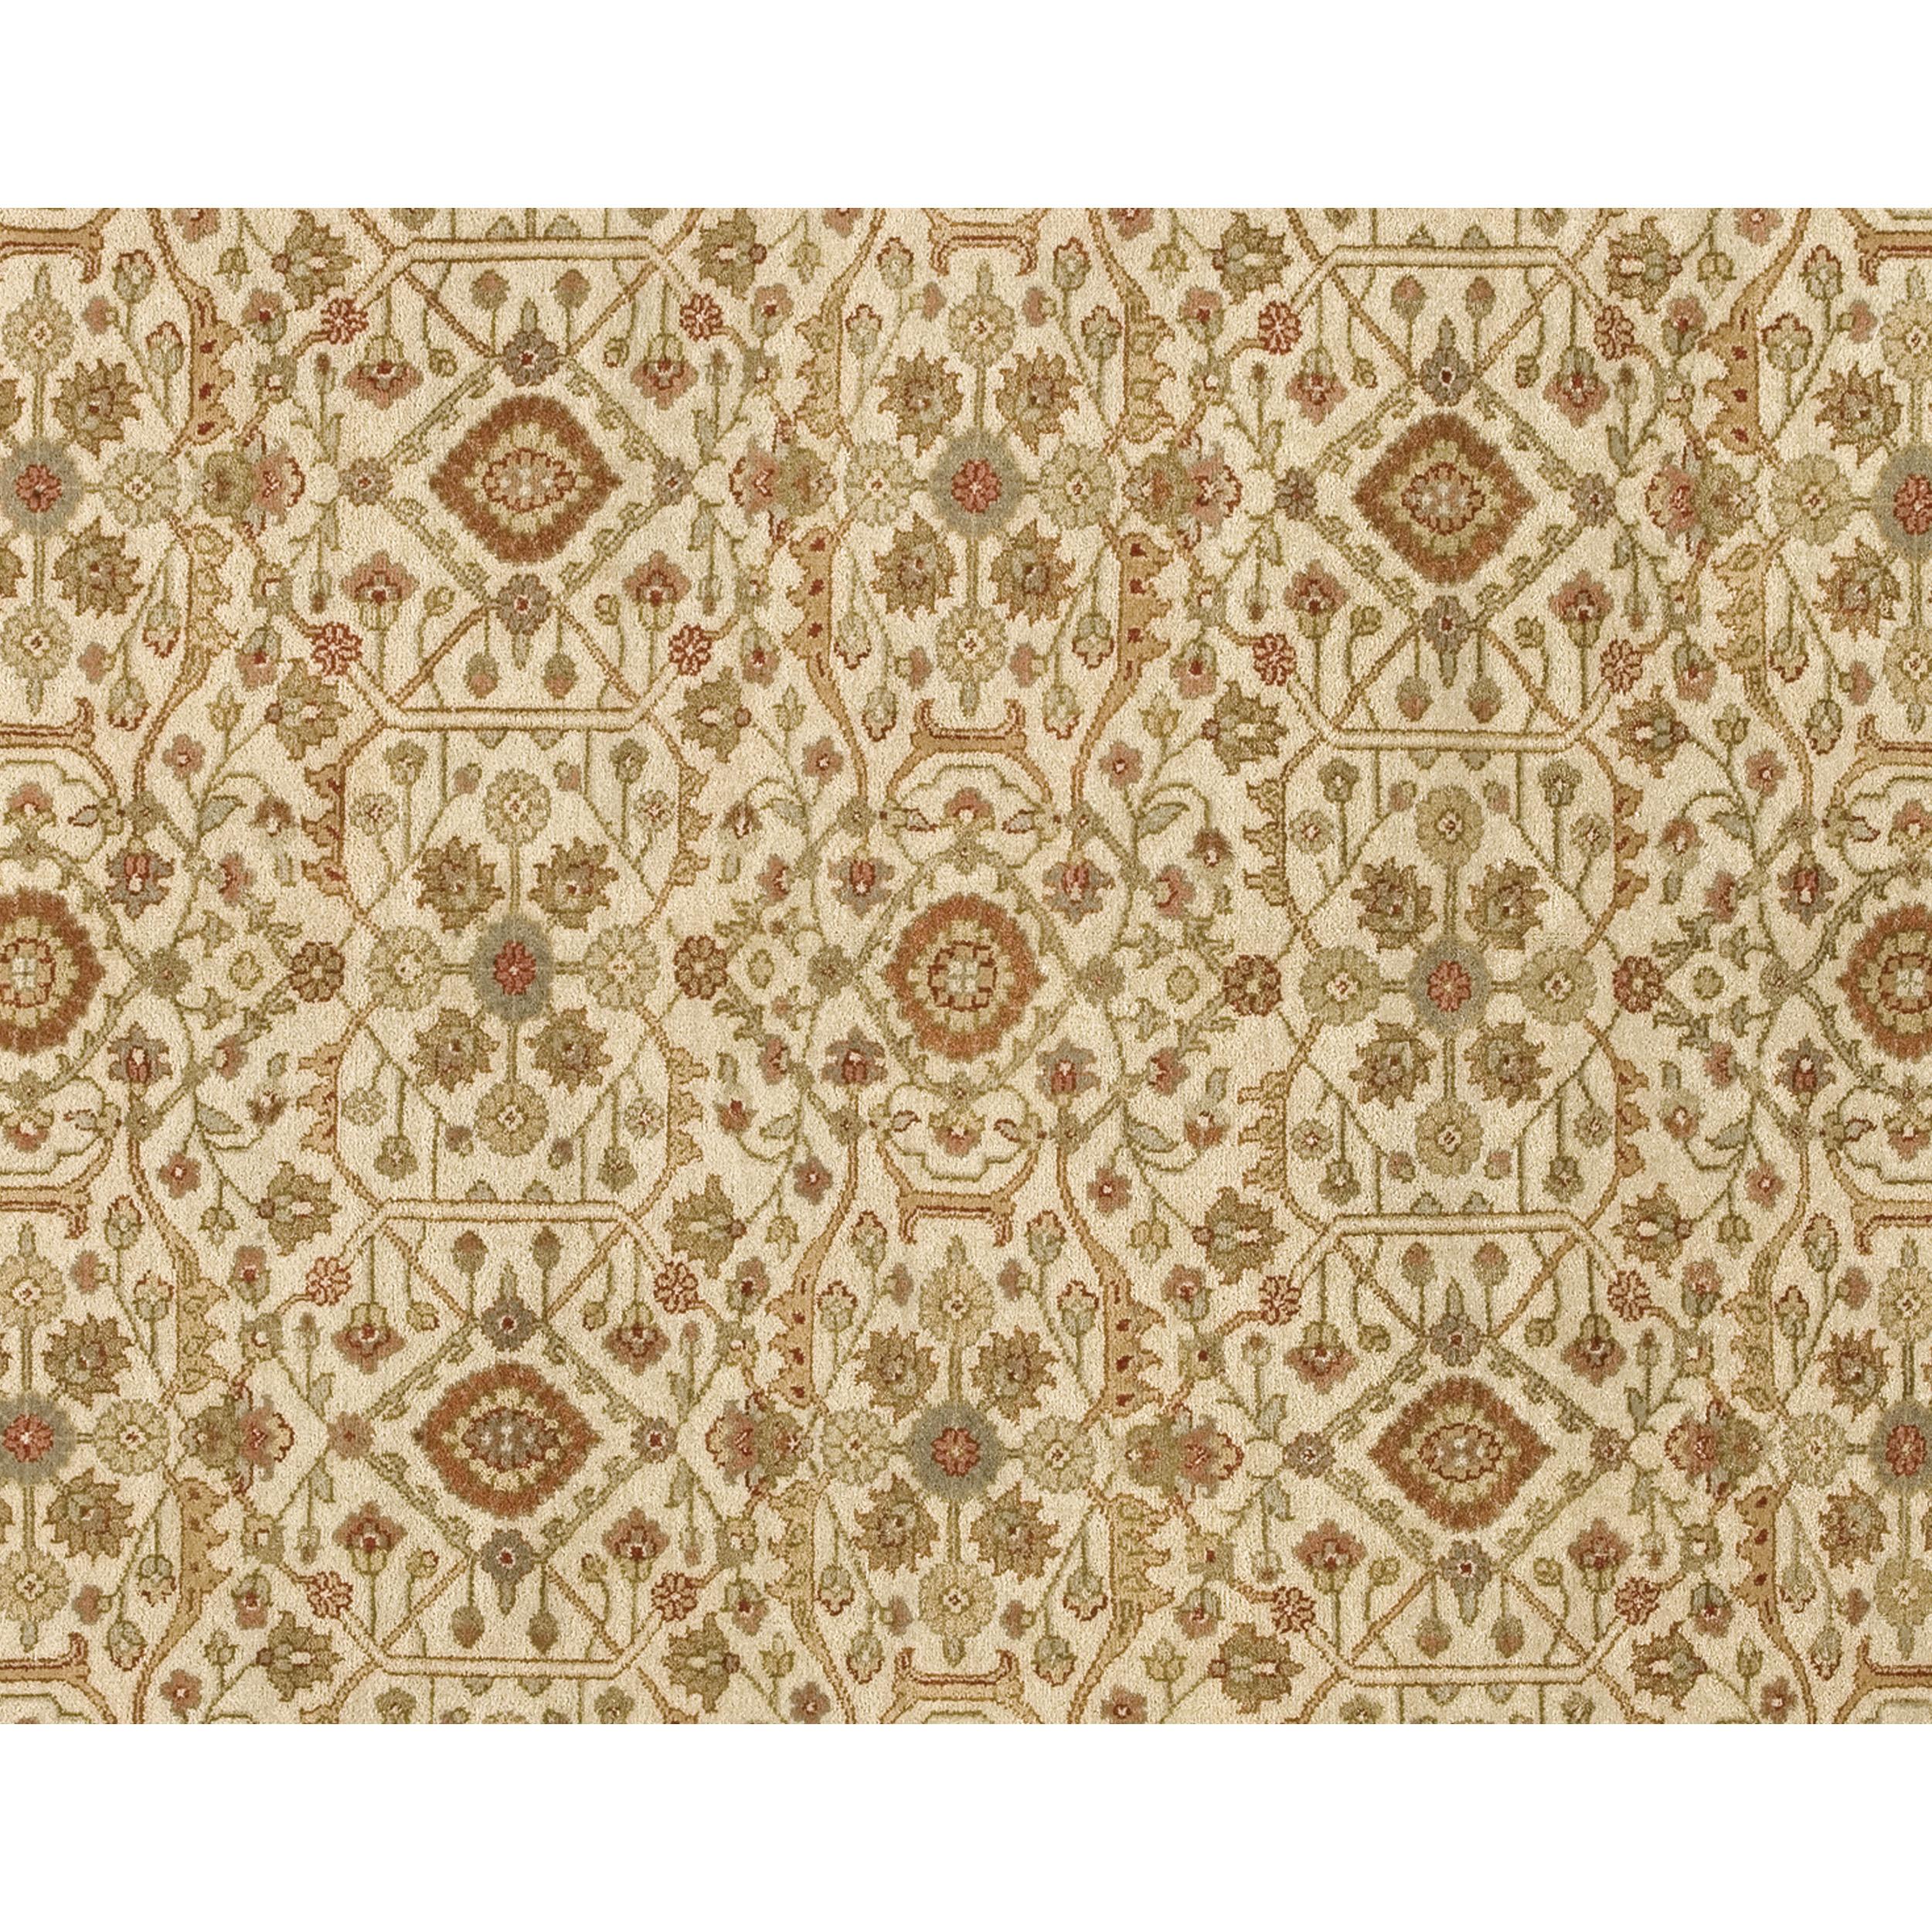 Indian Luxury Traditional Hand-Knotted Ziegler Ivory & Brick 11x19 Rug For Sale